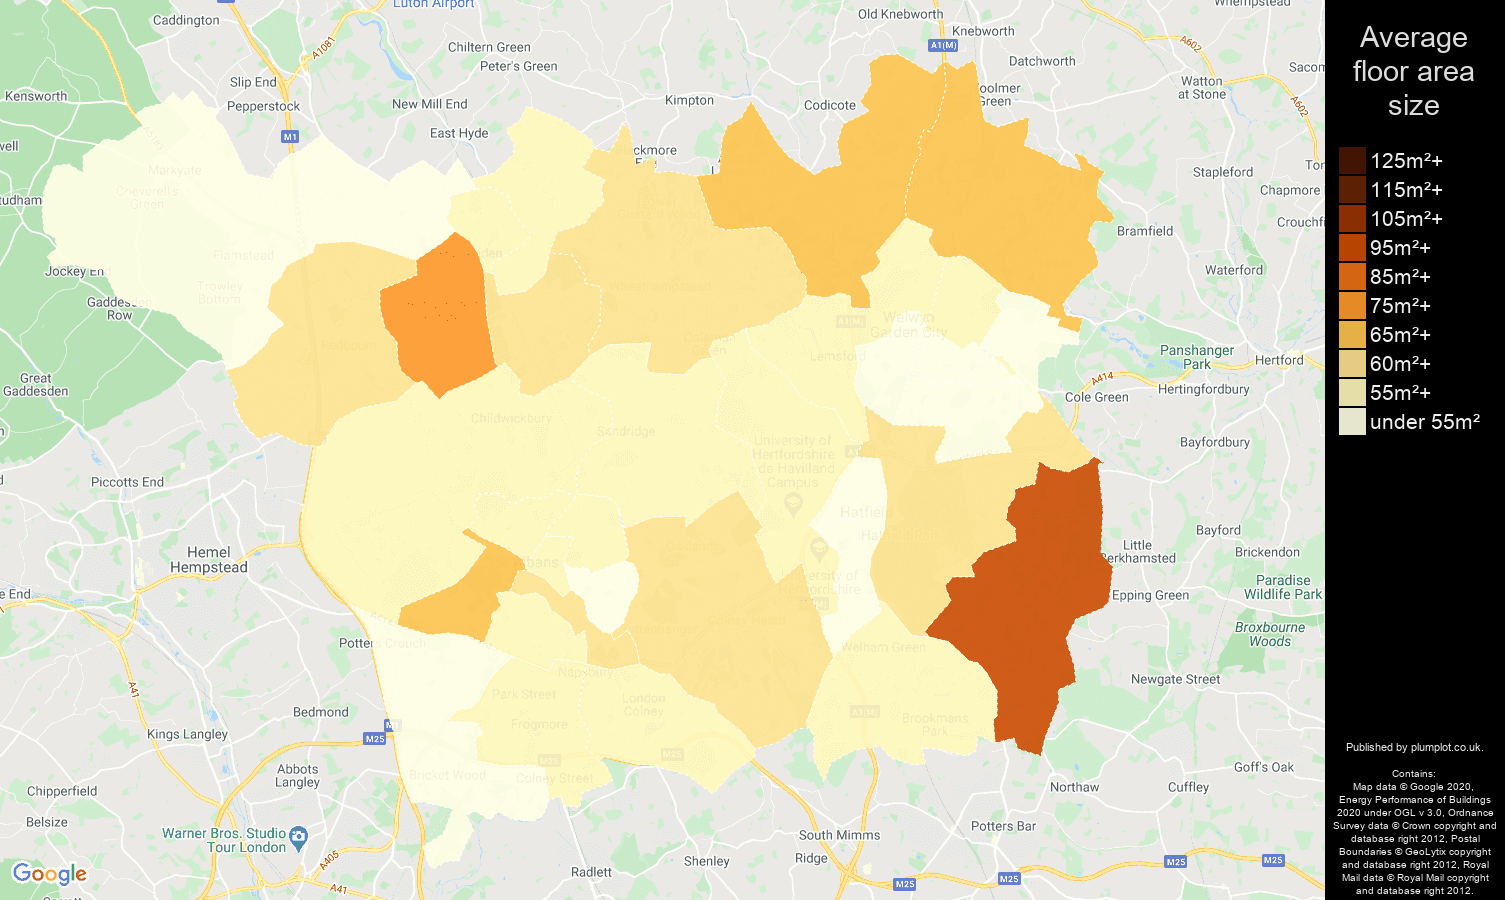 St Albans map of average floor area size of flats